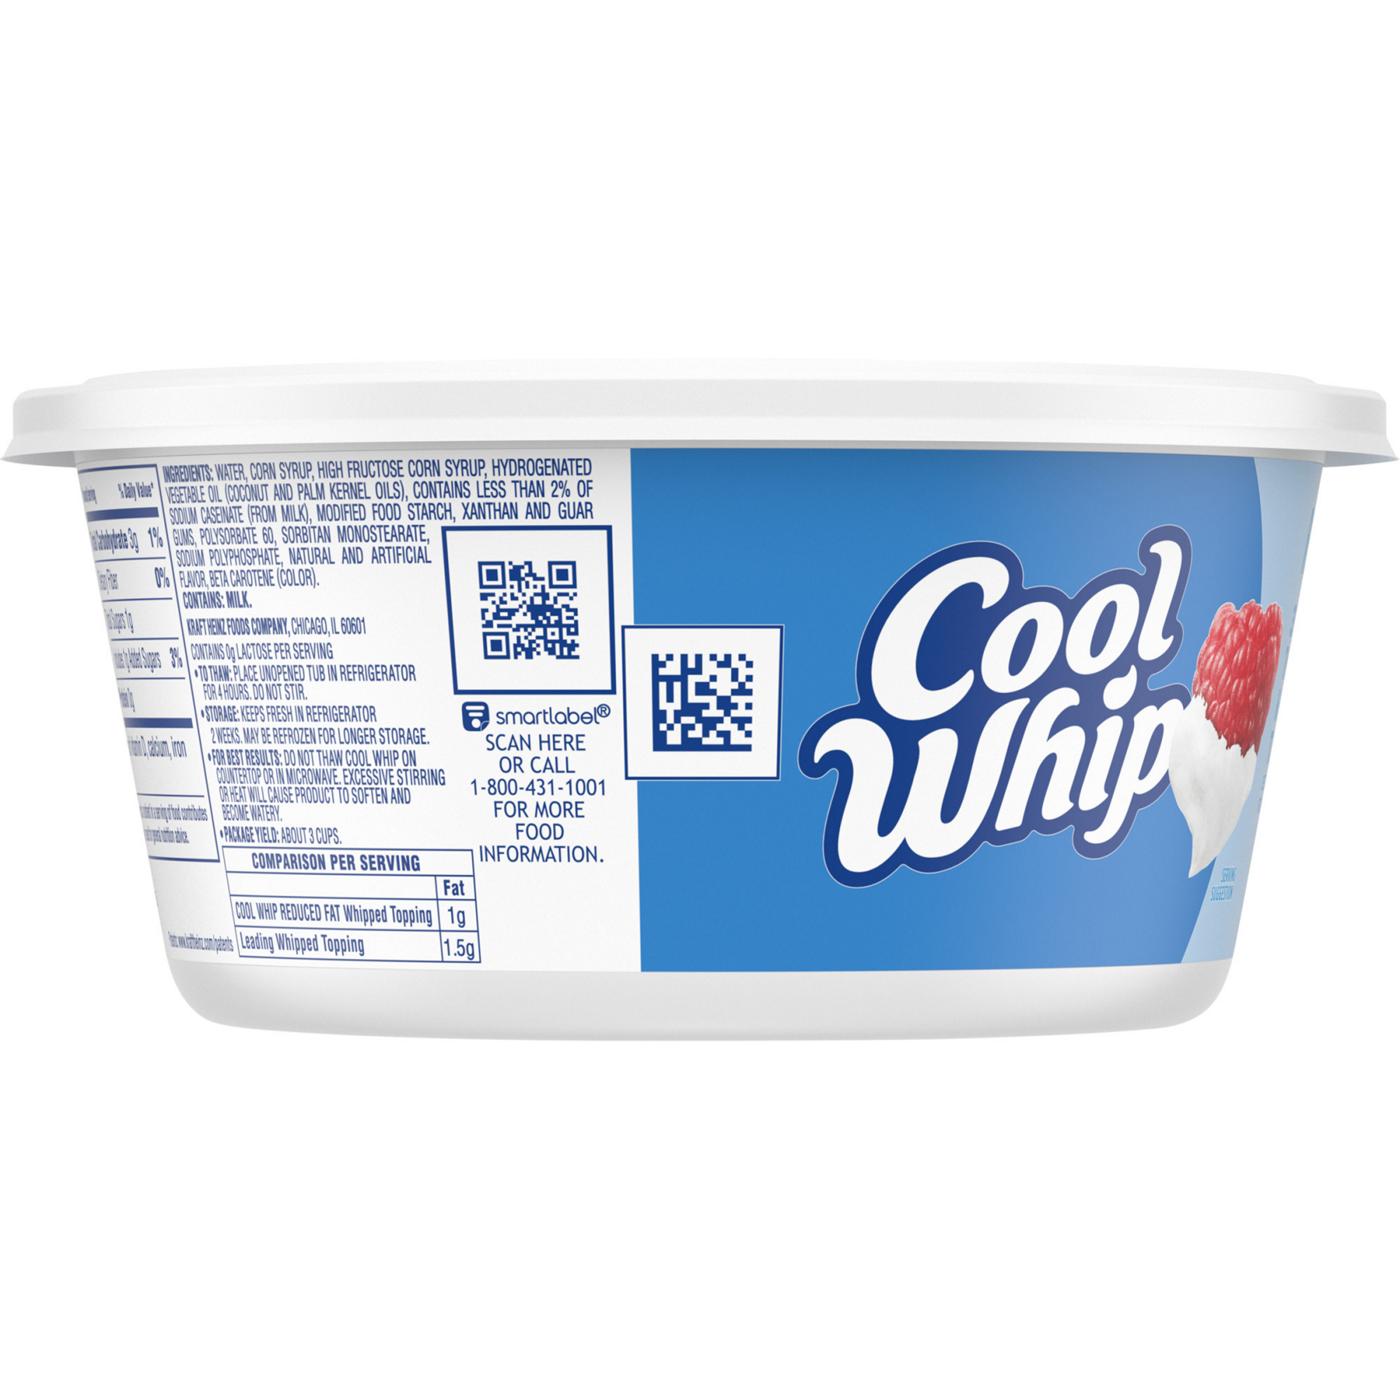 Kraft Cool Whip Reduced Fat Whipped Topping; image 4 of 9